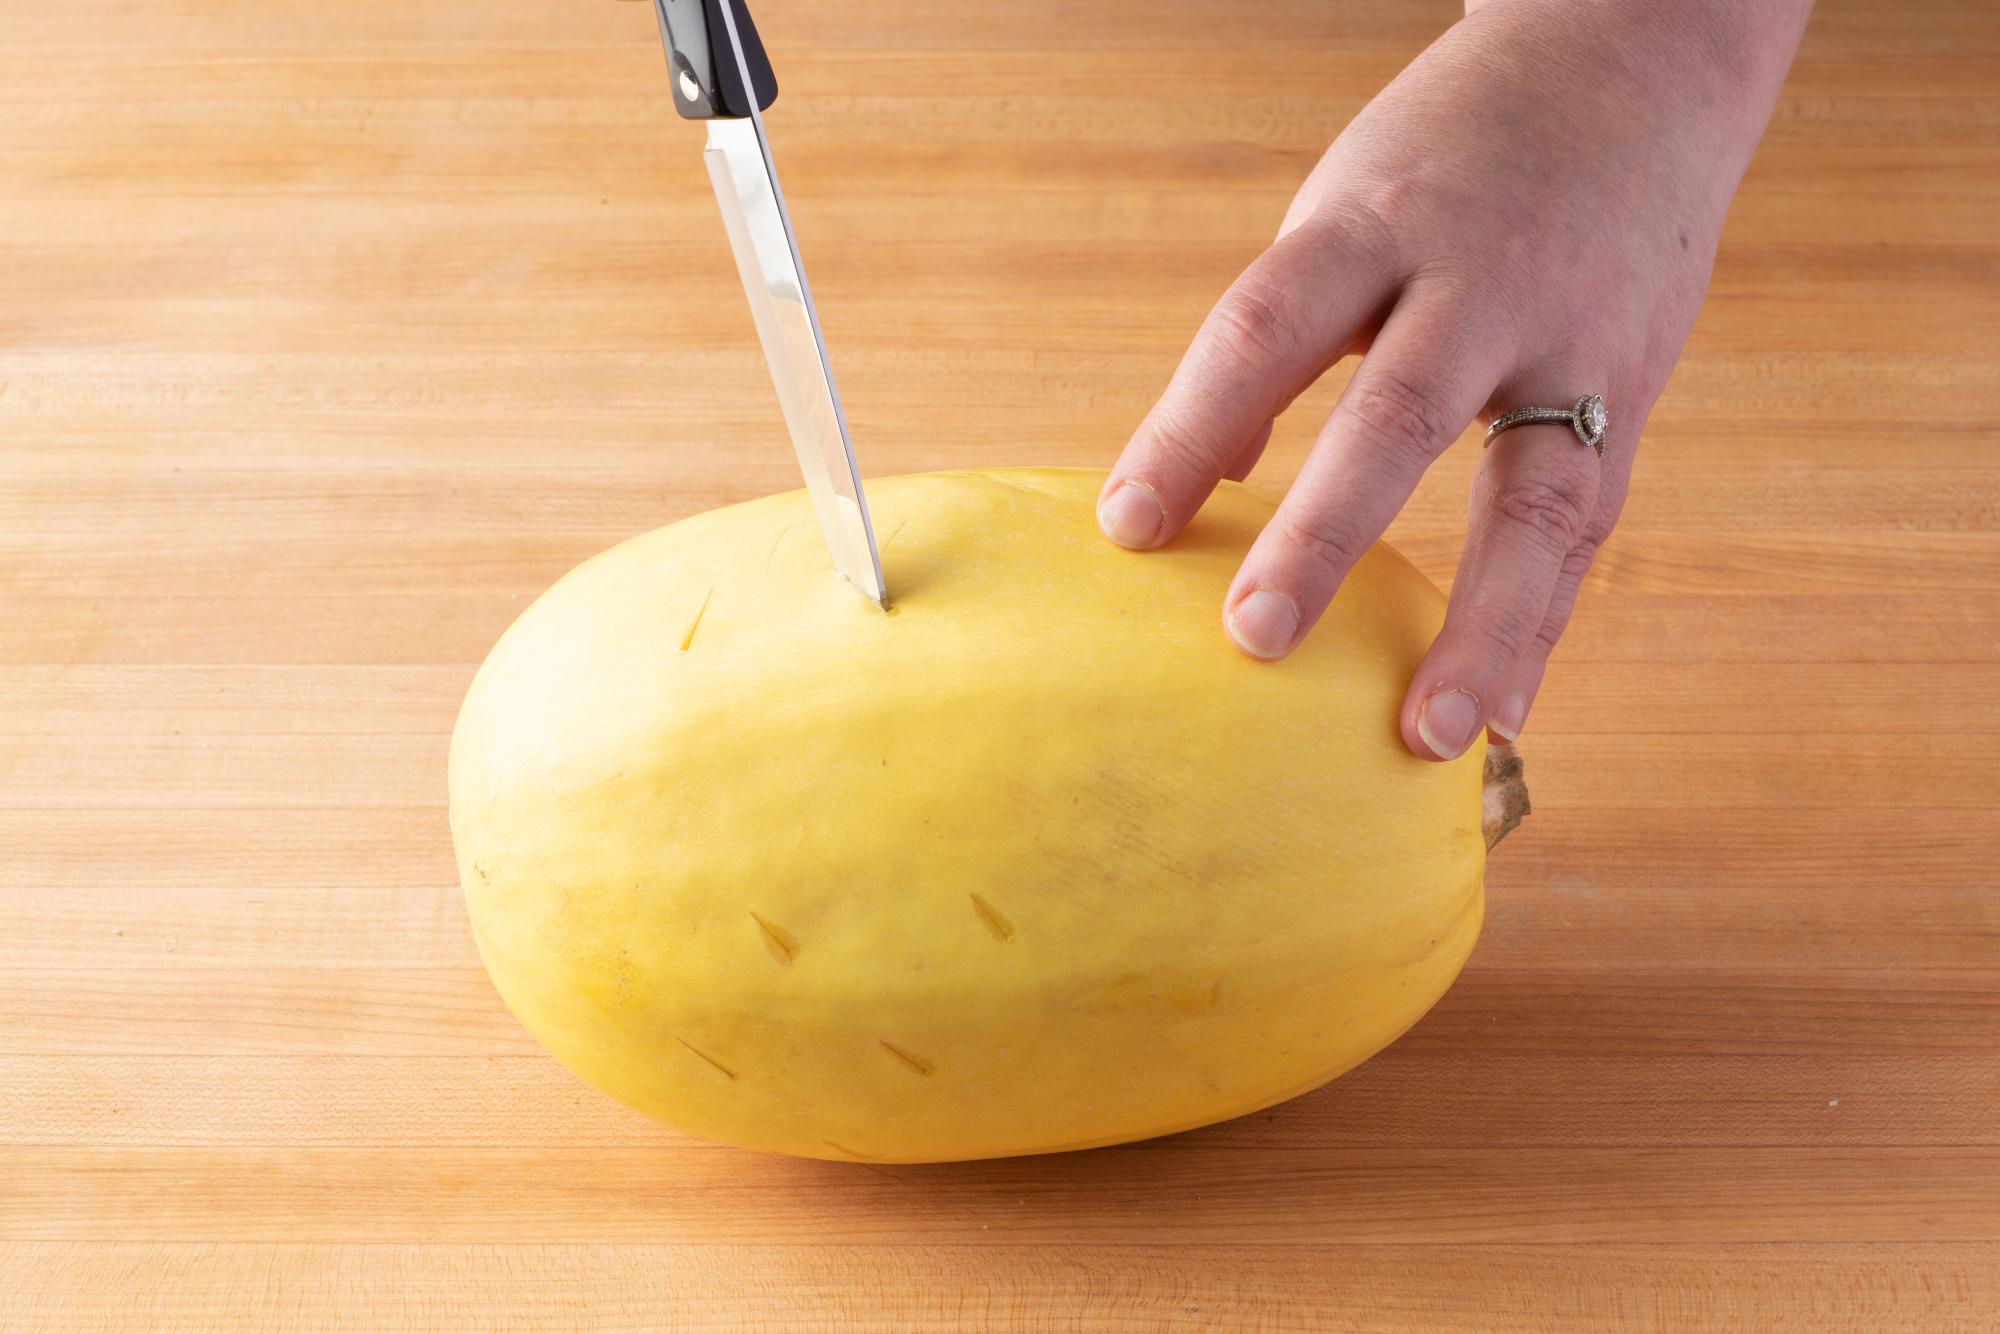 Piercing the outside of the squash with a 4 Inch Paring knife.